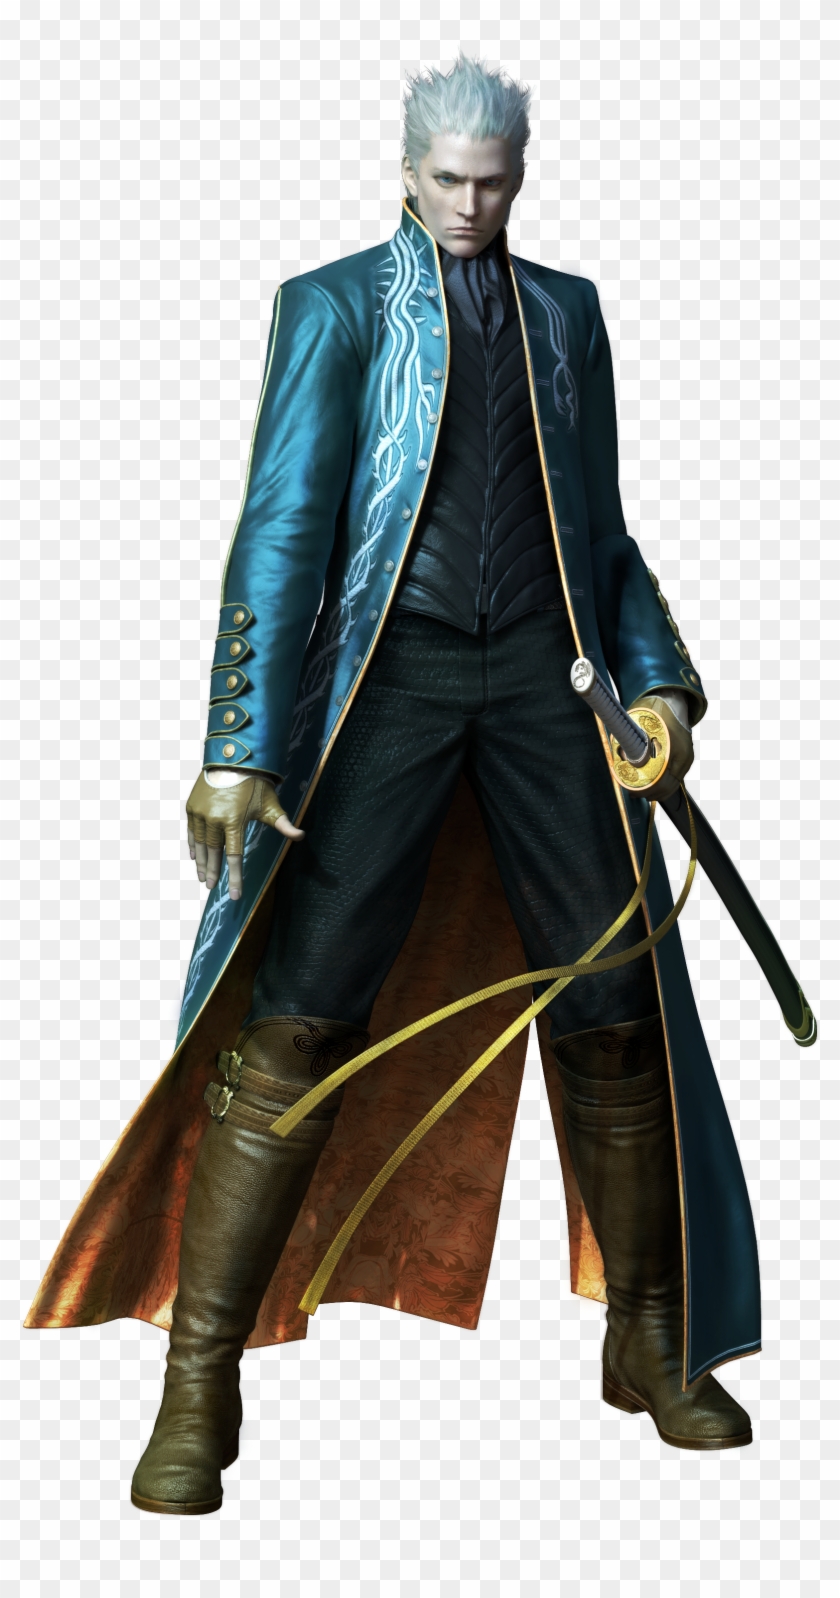 You Can Give Any Character A Single Sword From All - Devil May Cry Vergil Png #1763216